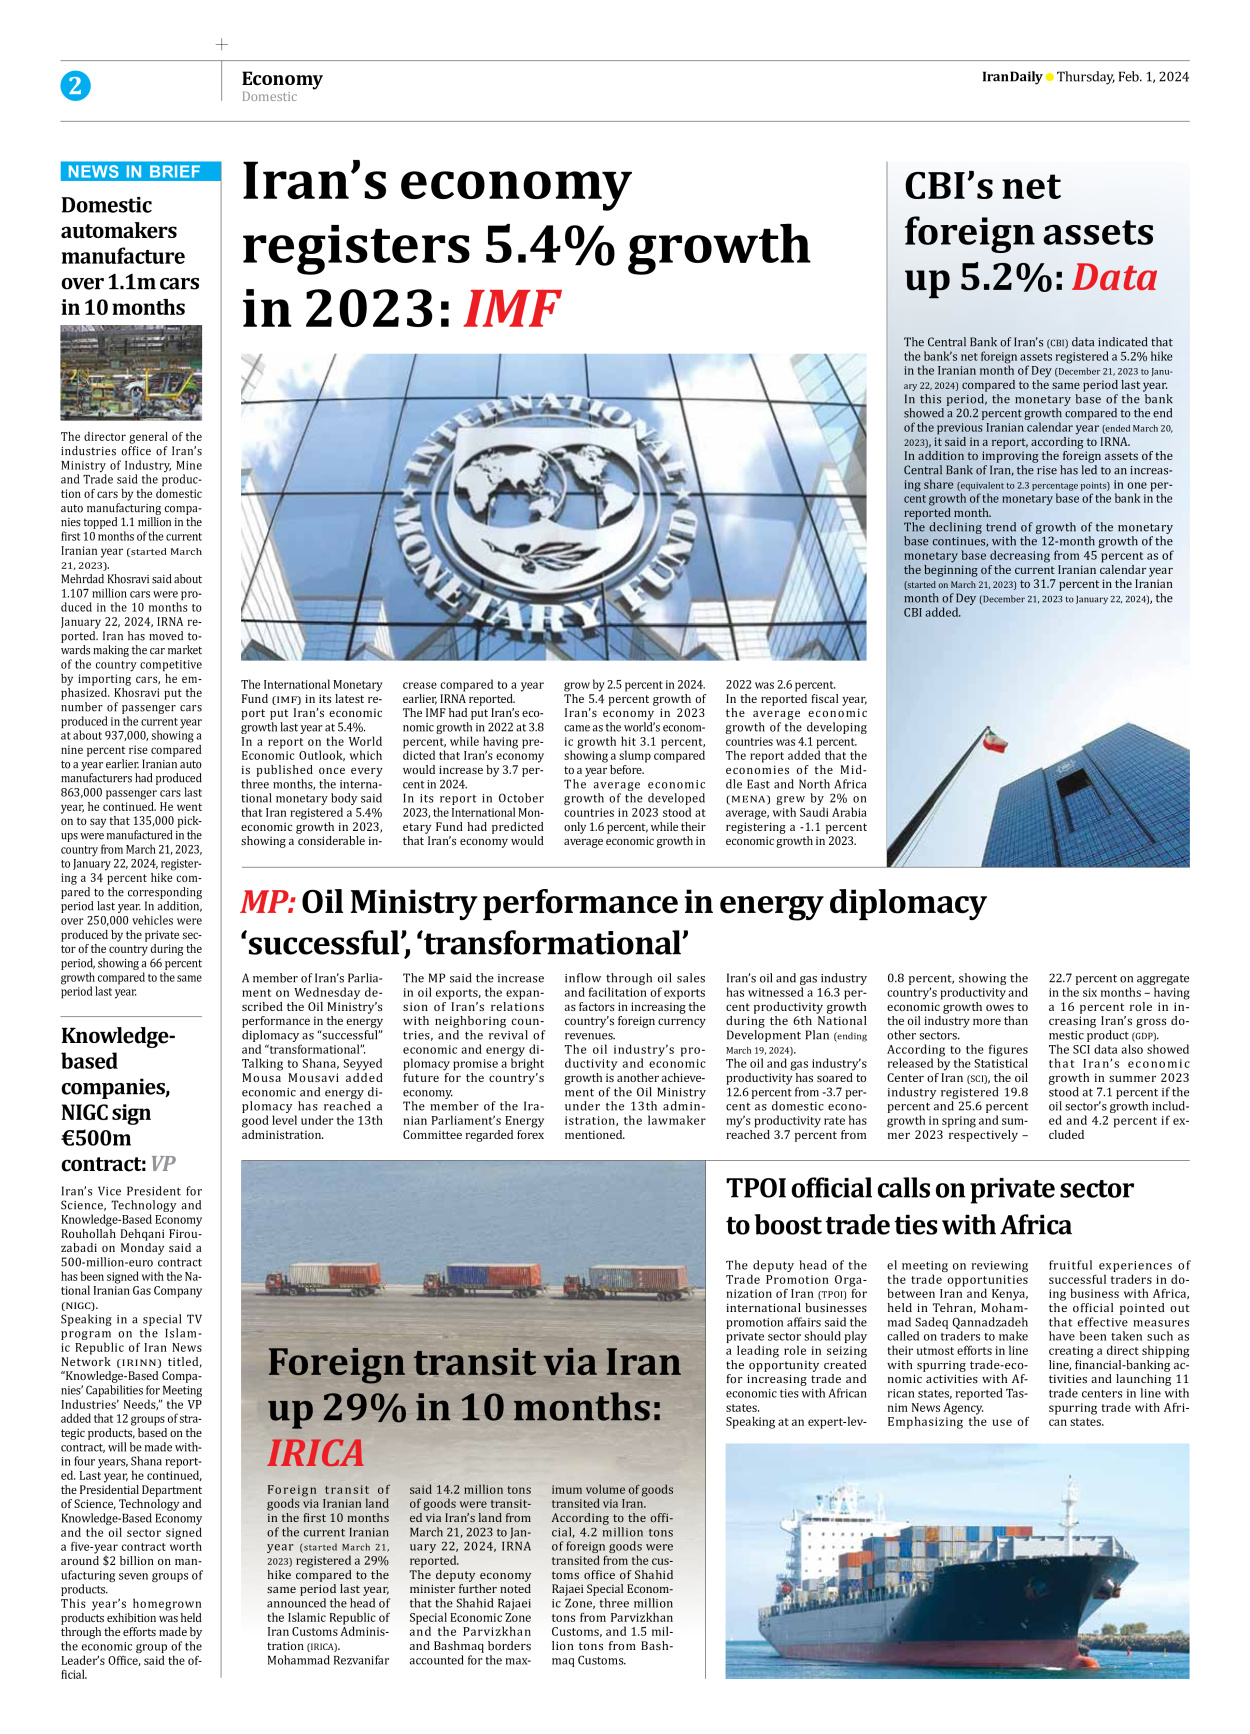 Iran Daily - Number Seven Thousand Four Hundred and Ninety Nine - 01 February 2024 - Page 2